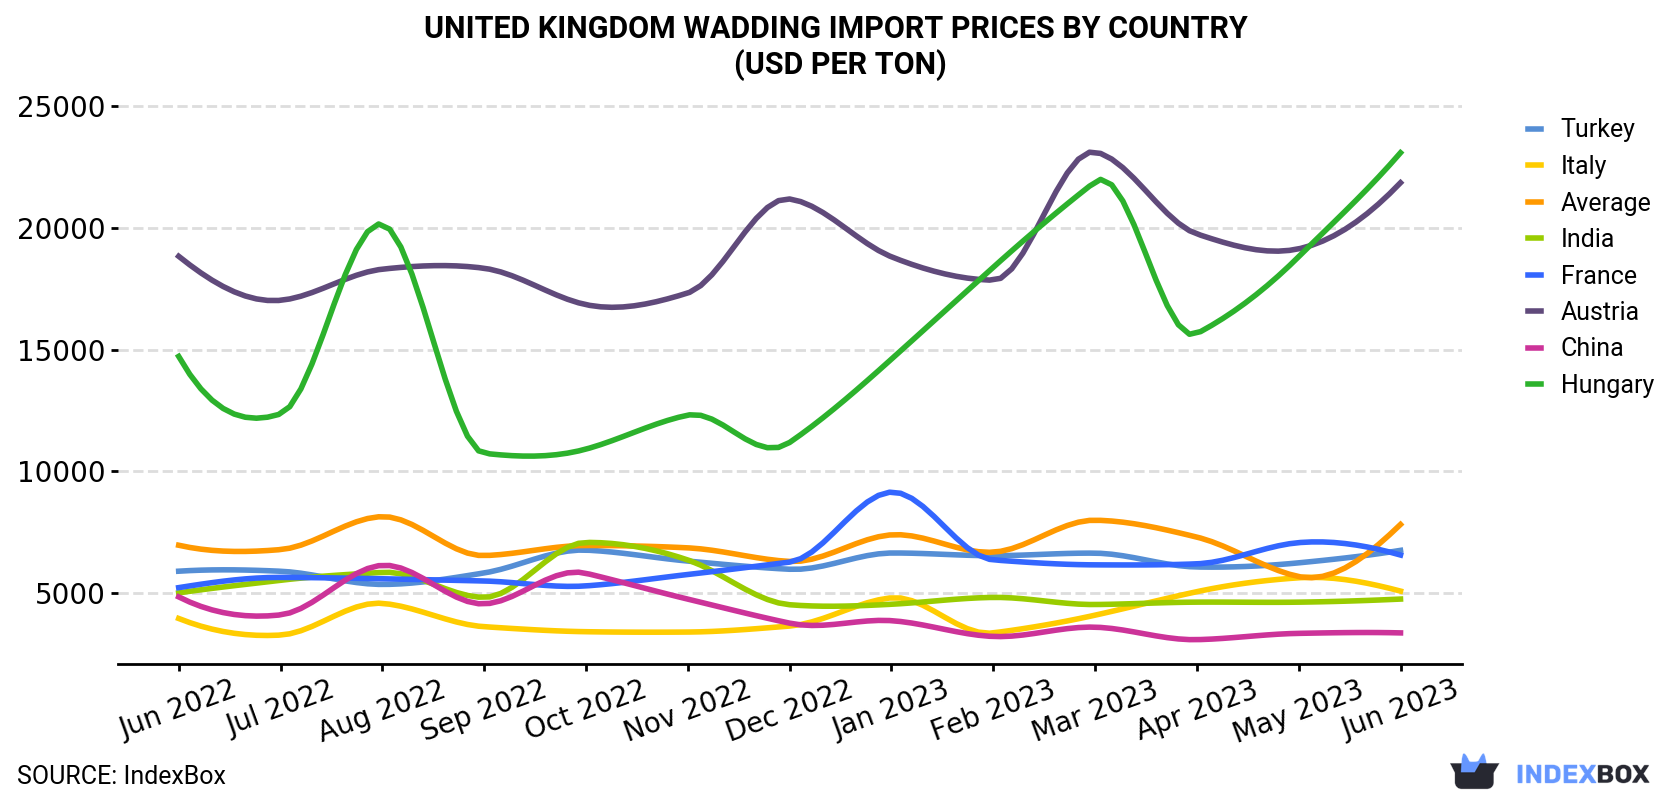 United Kingdom Wadding Import Prices By Country (USD Per Ton)